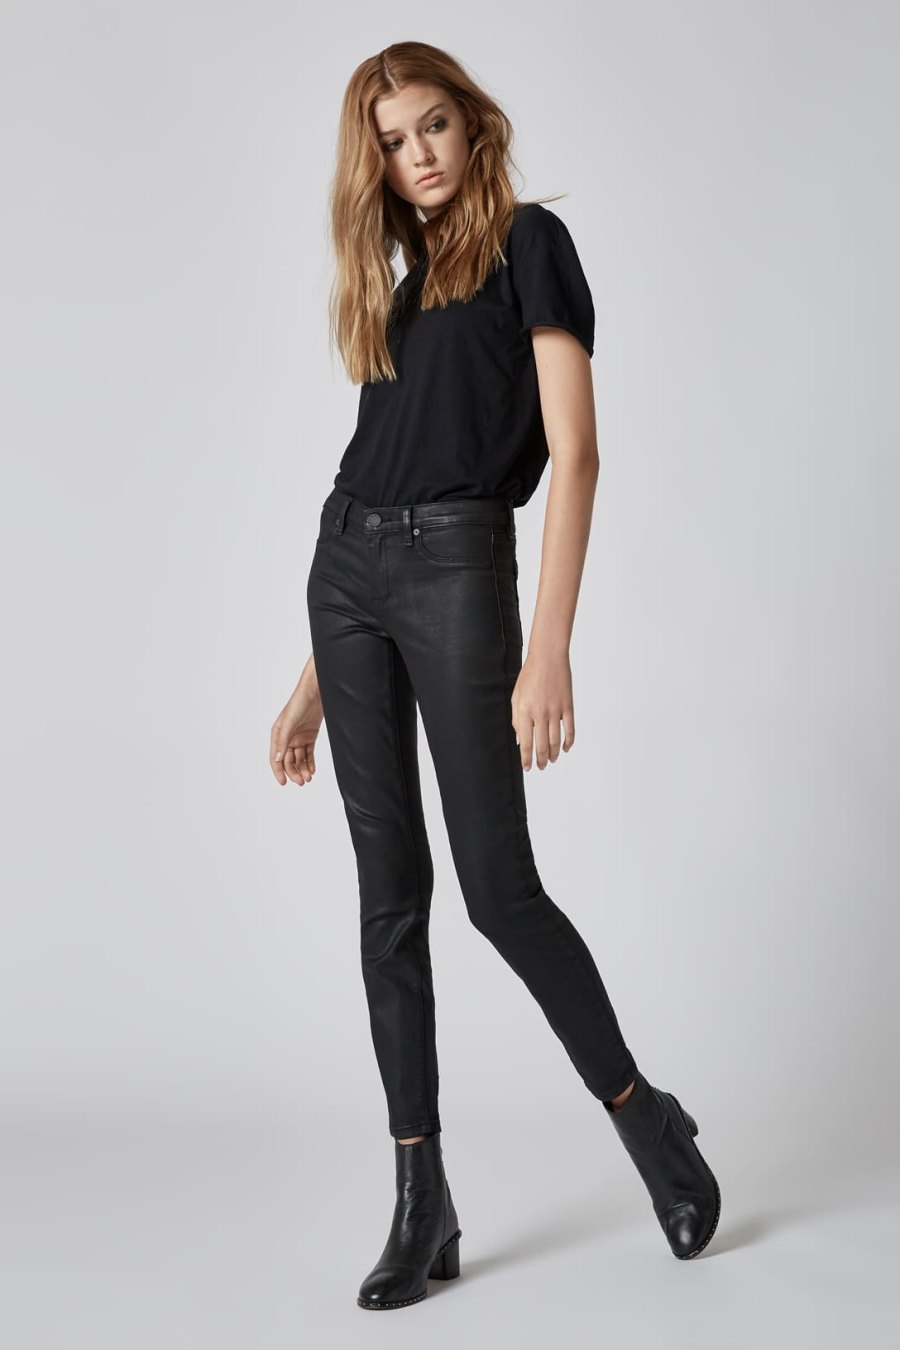 Shop These Coated Skinny Jeans for Under $100 at Nordstrom | Us Weekly